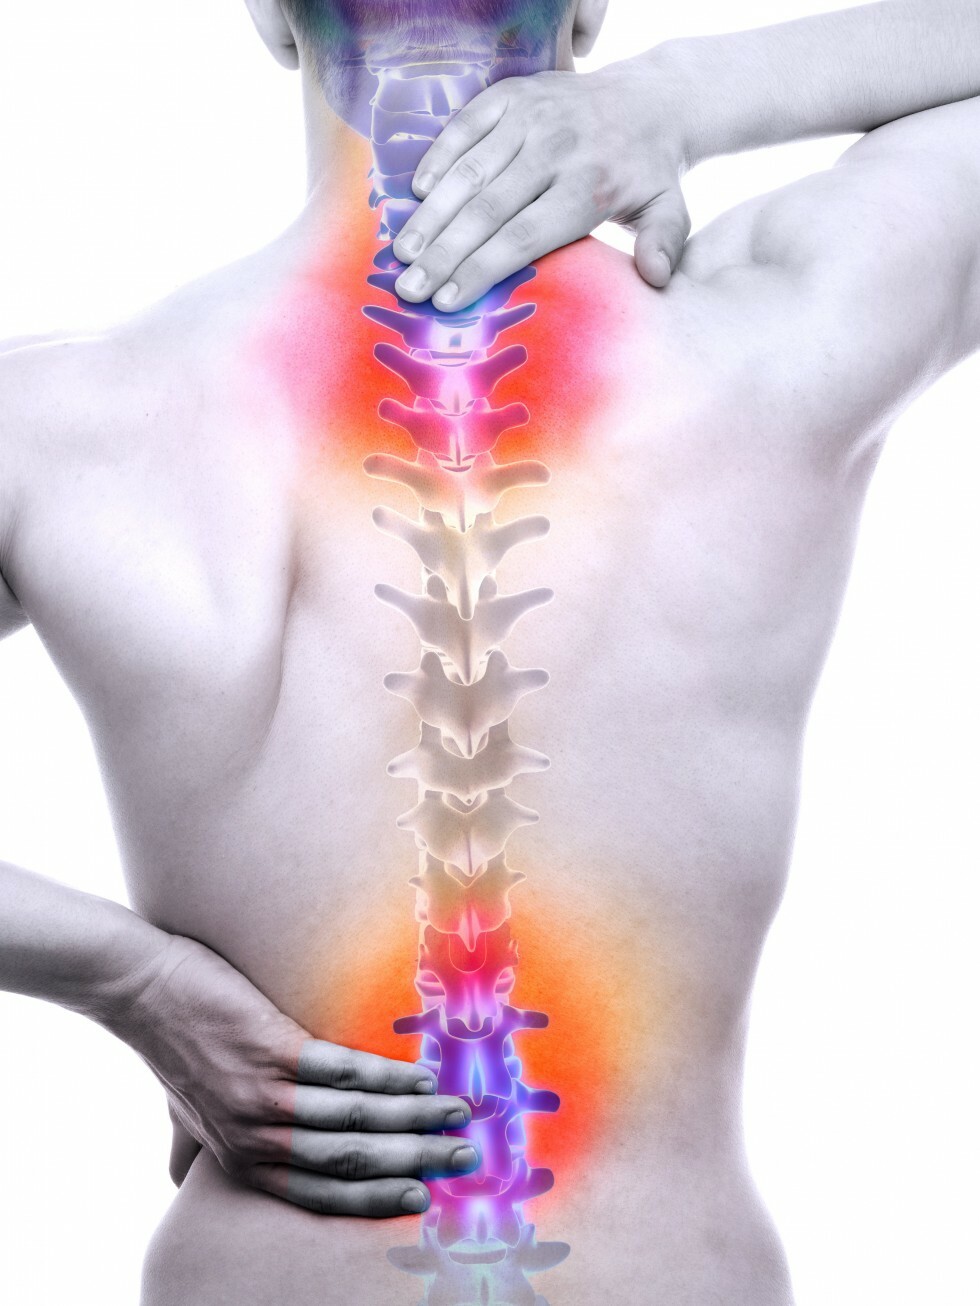 art of highlighted points on a person's spine